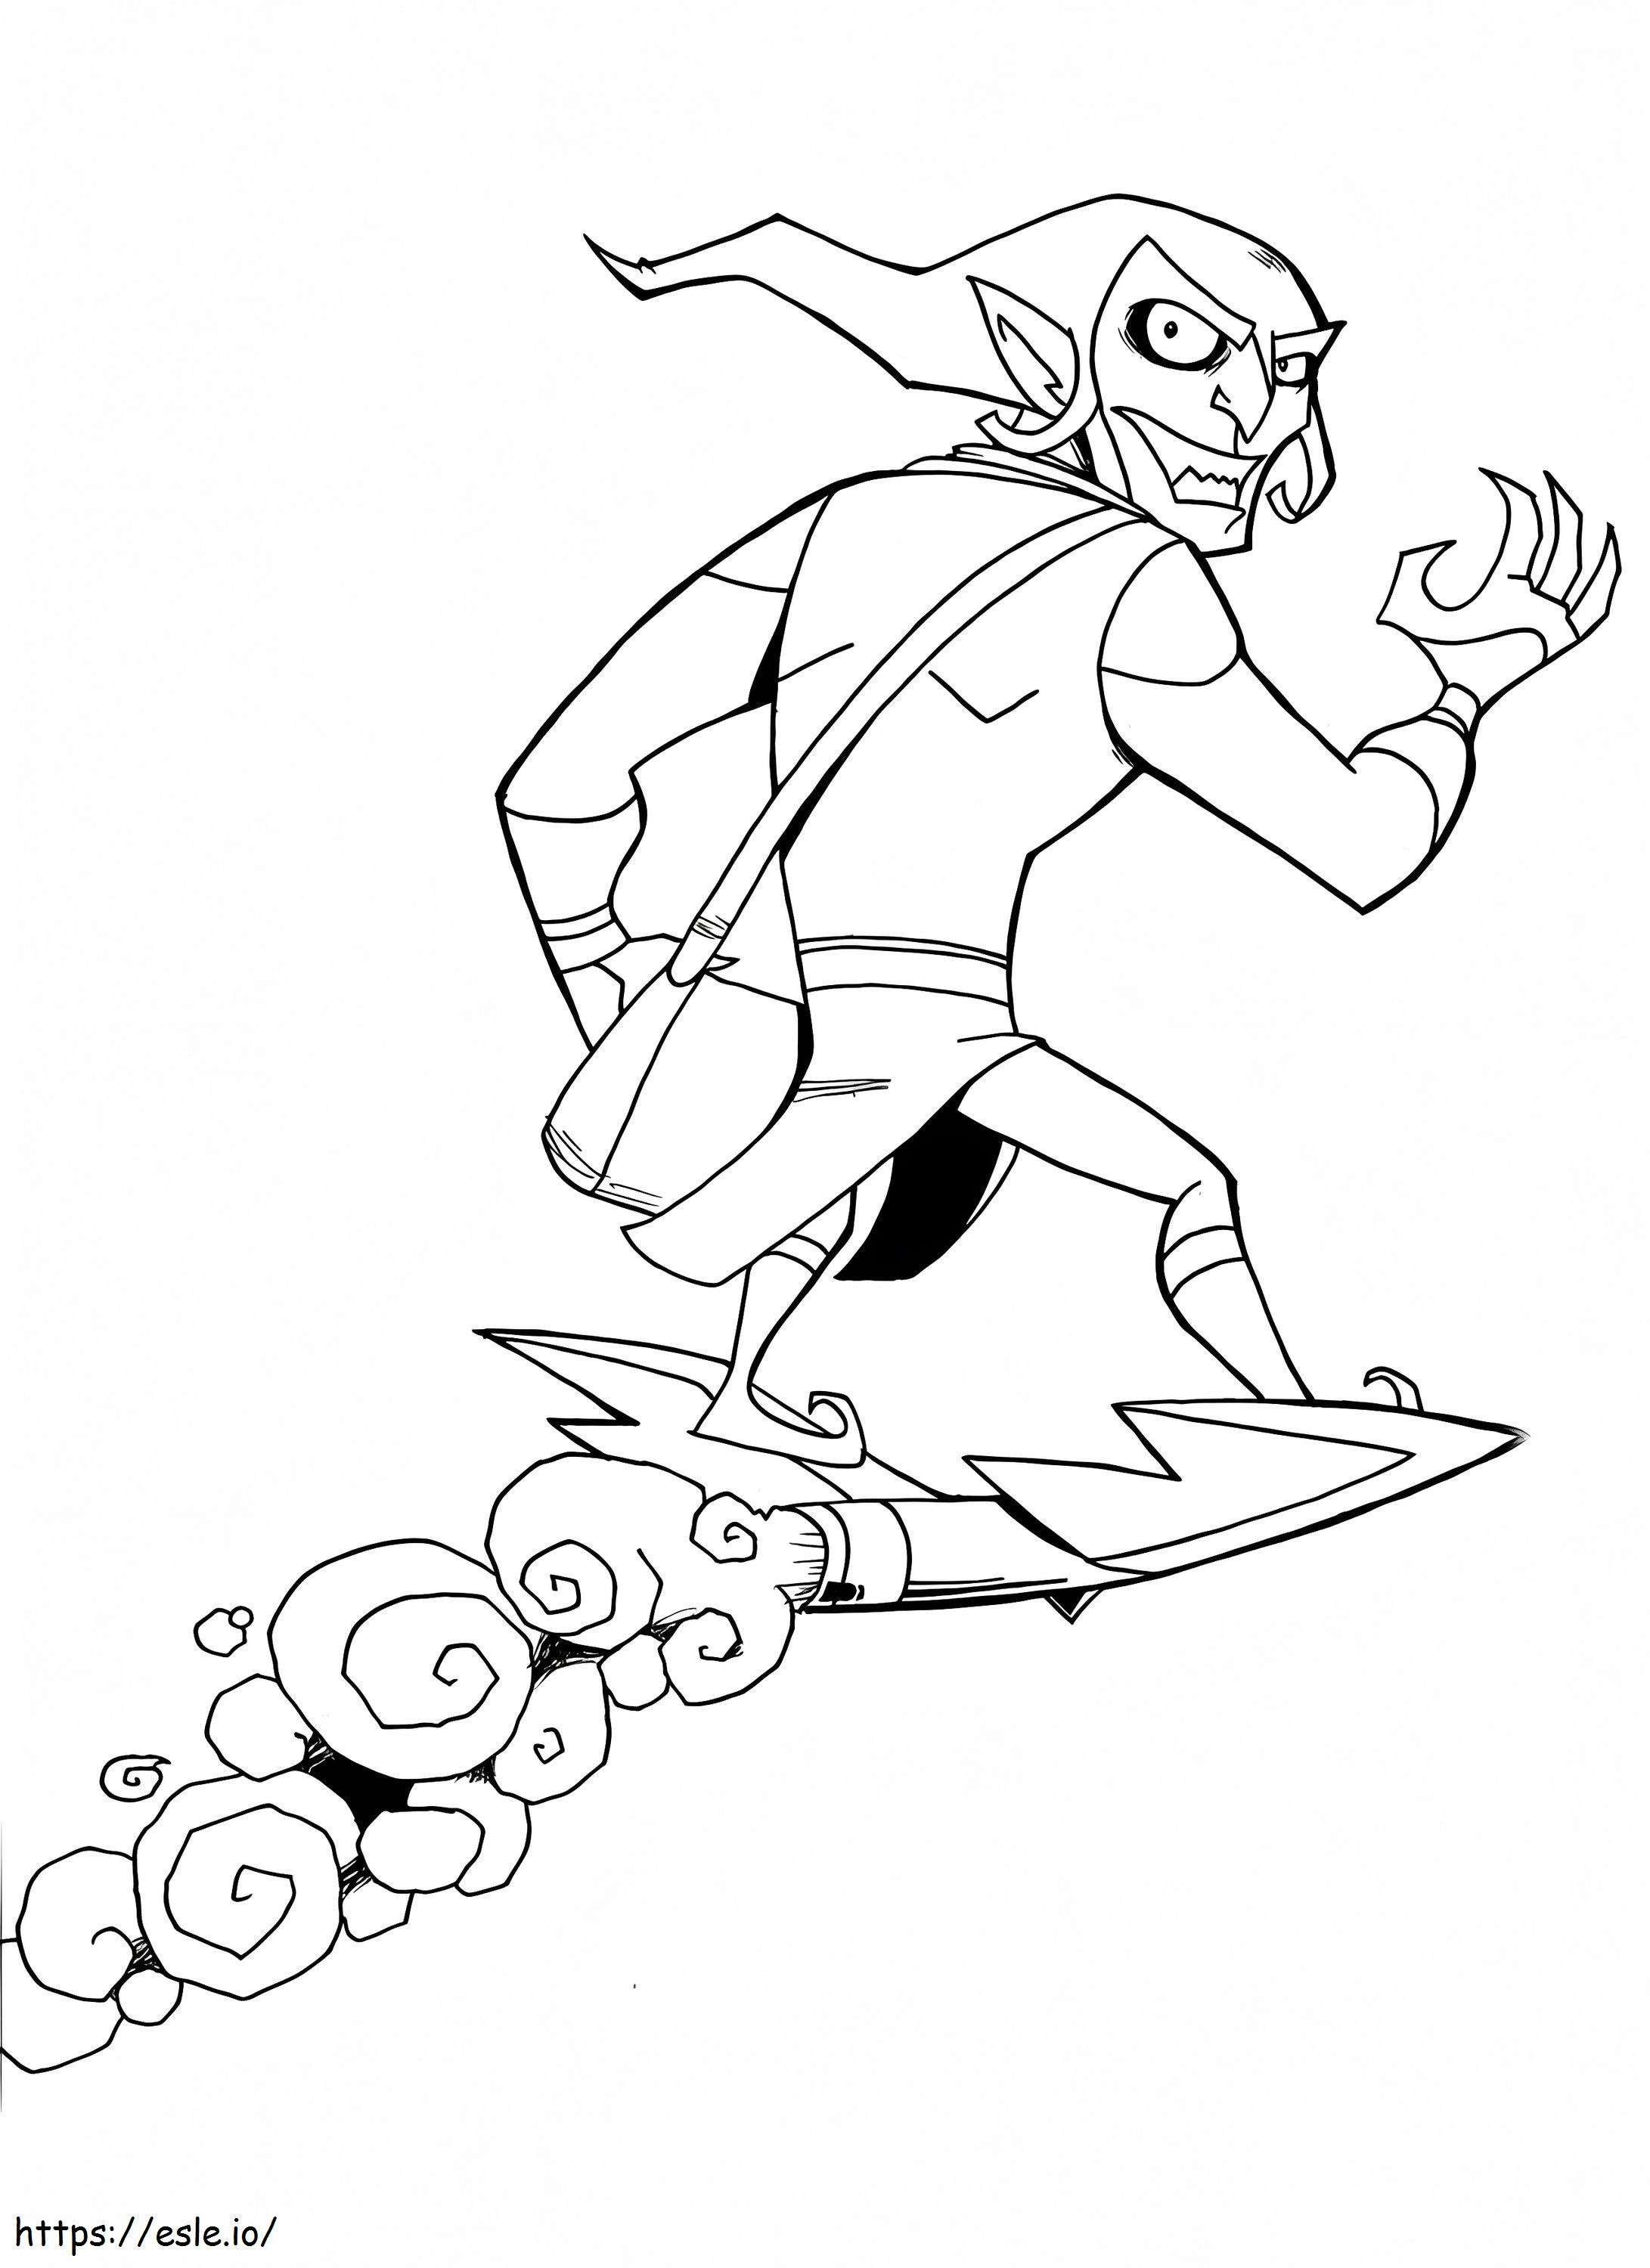 Flying Goblin coloring page